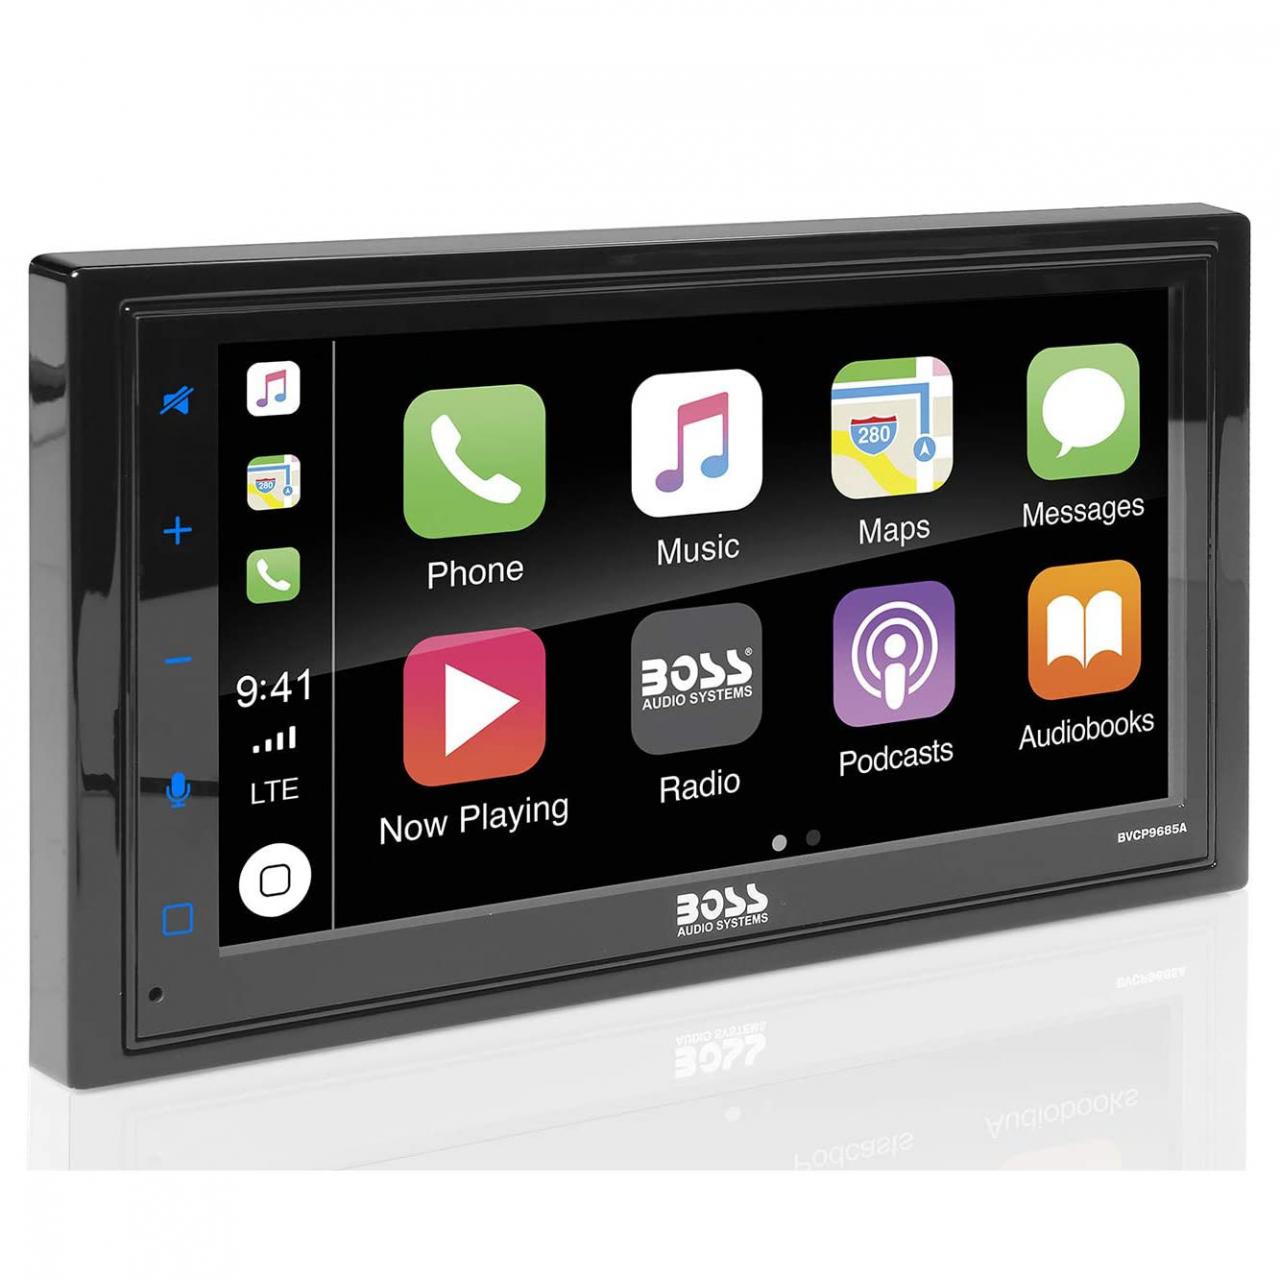 Buy Boss Audio System Double DIN Smartphone Bluetooth Touchscreen Vehicle  Multimedia Player Online in Taiwan. 121071281